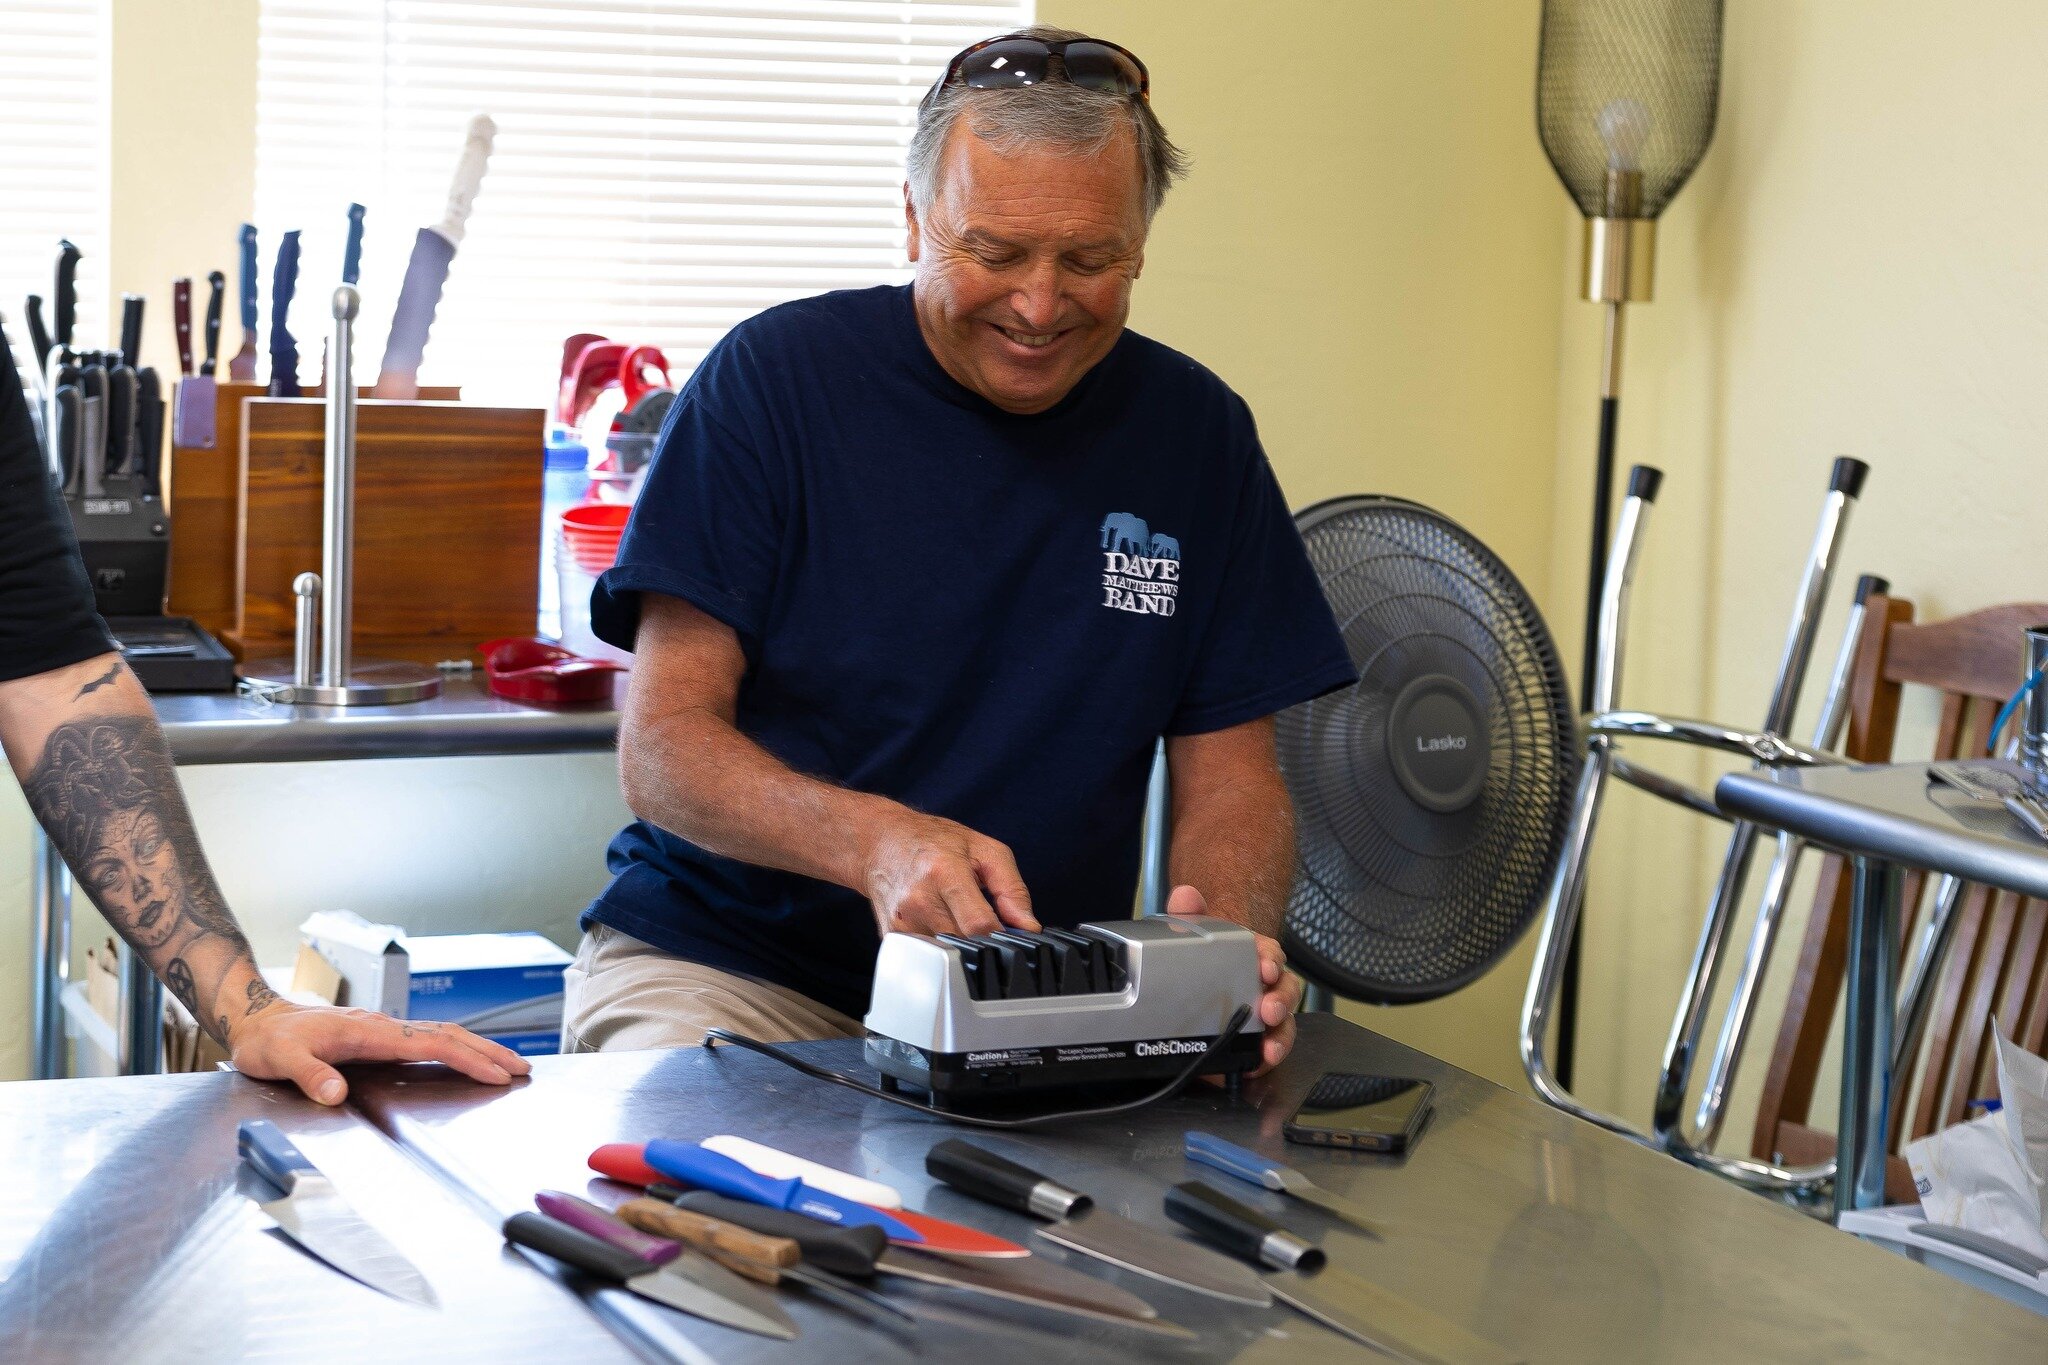 Volunteer, Dr. Chris Walton, came into the Eugene Mission to teach a group of guests the proper way to sharpen knives! 

Not only is cooking a daily task for most of us but it can also be engaging and accessible sober recreation for all guests as the